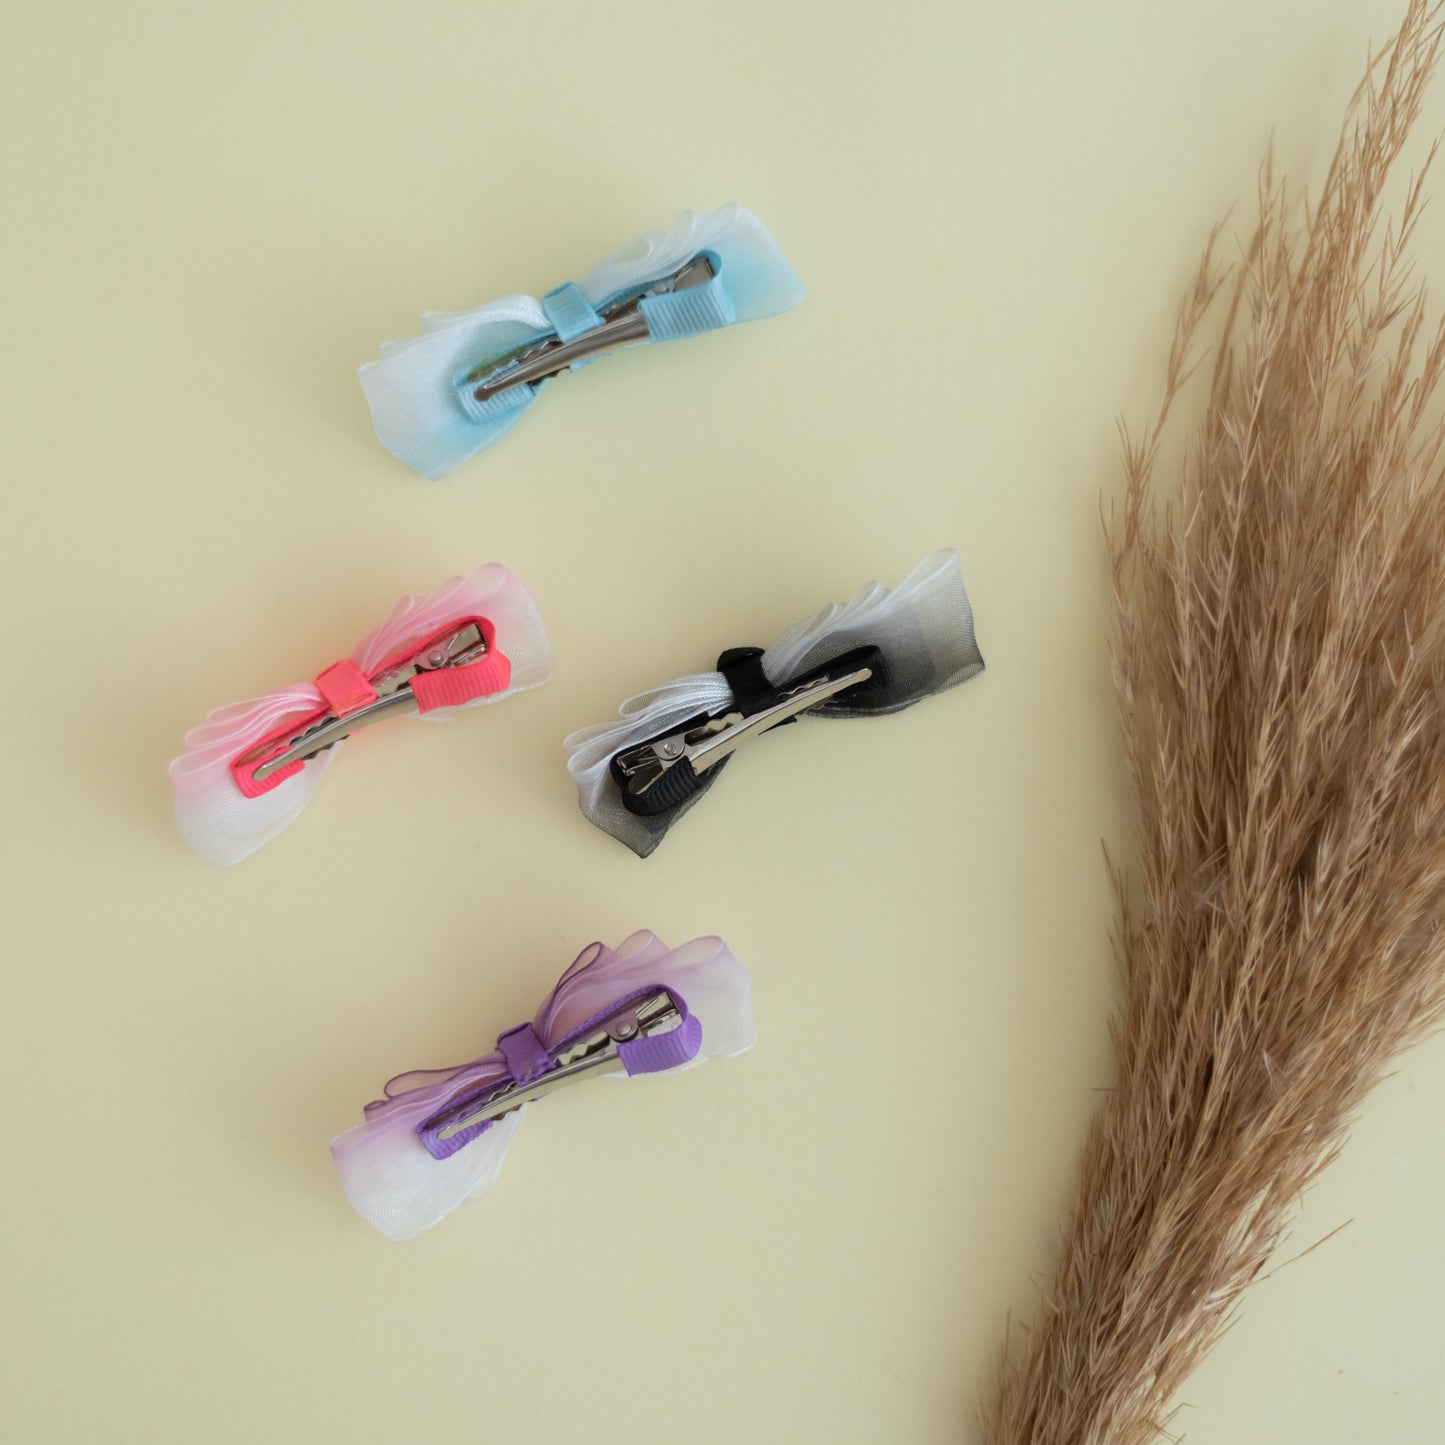 Combo: Shaded organza double loop bows on alligator clip -Pink, Purple, Black and Blue (4 single bow = 4 quantity)